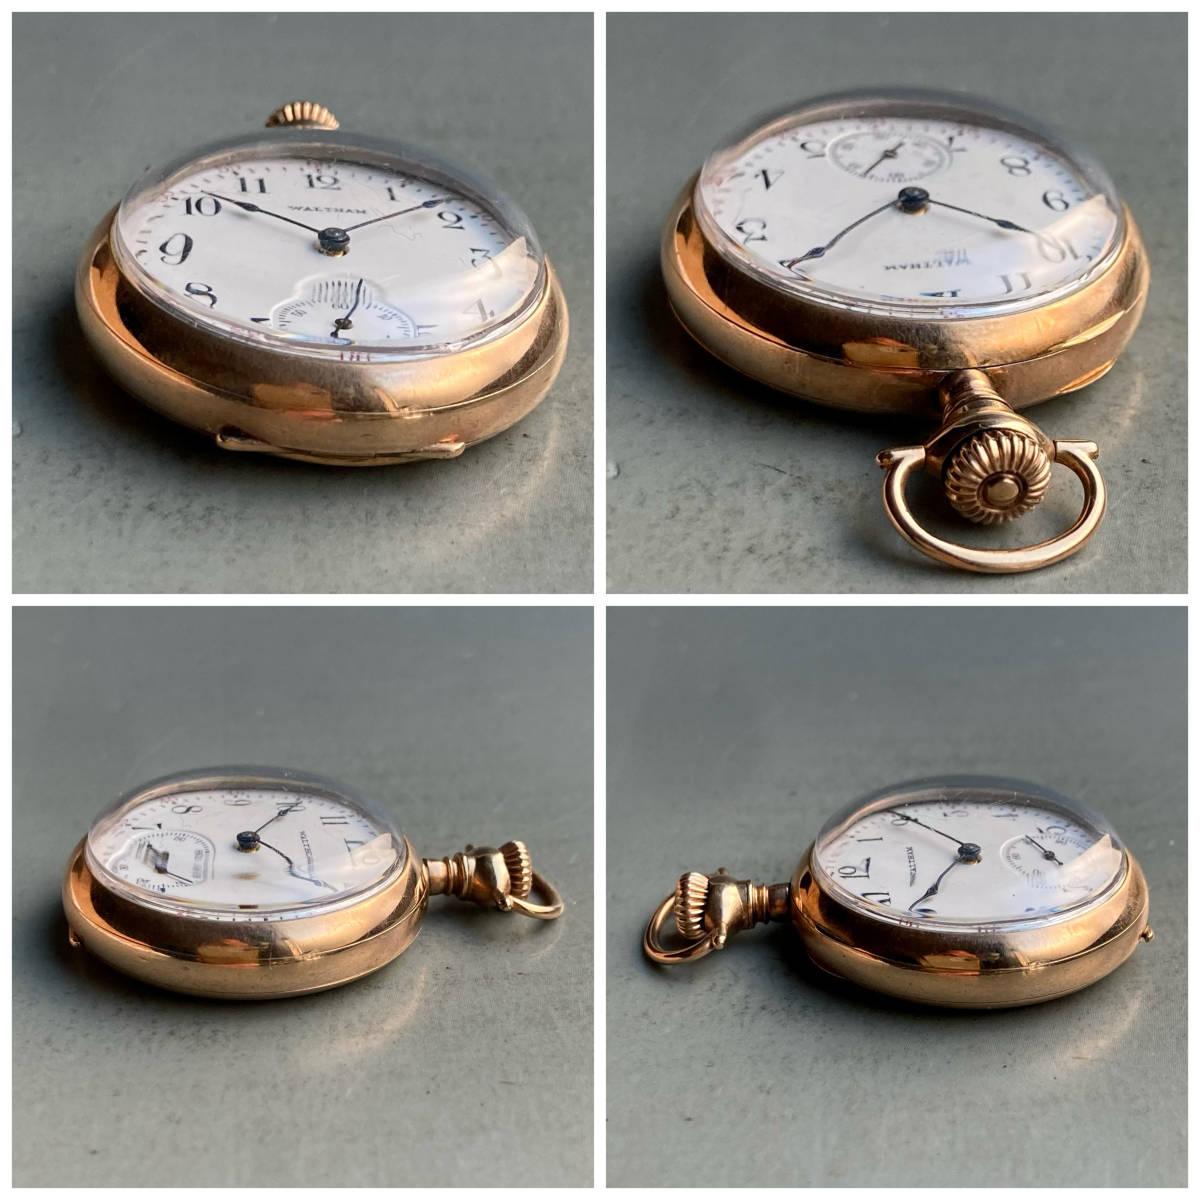 Waltham Pocket Watch Antique Manual Open Face 31mm Gold - Murphy Johnson Watches Co.